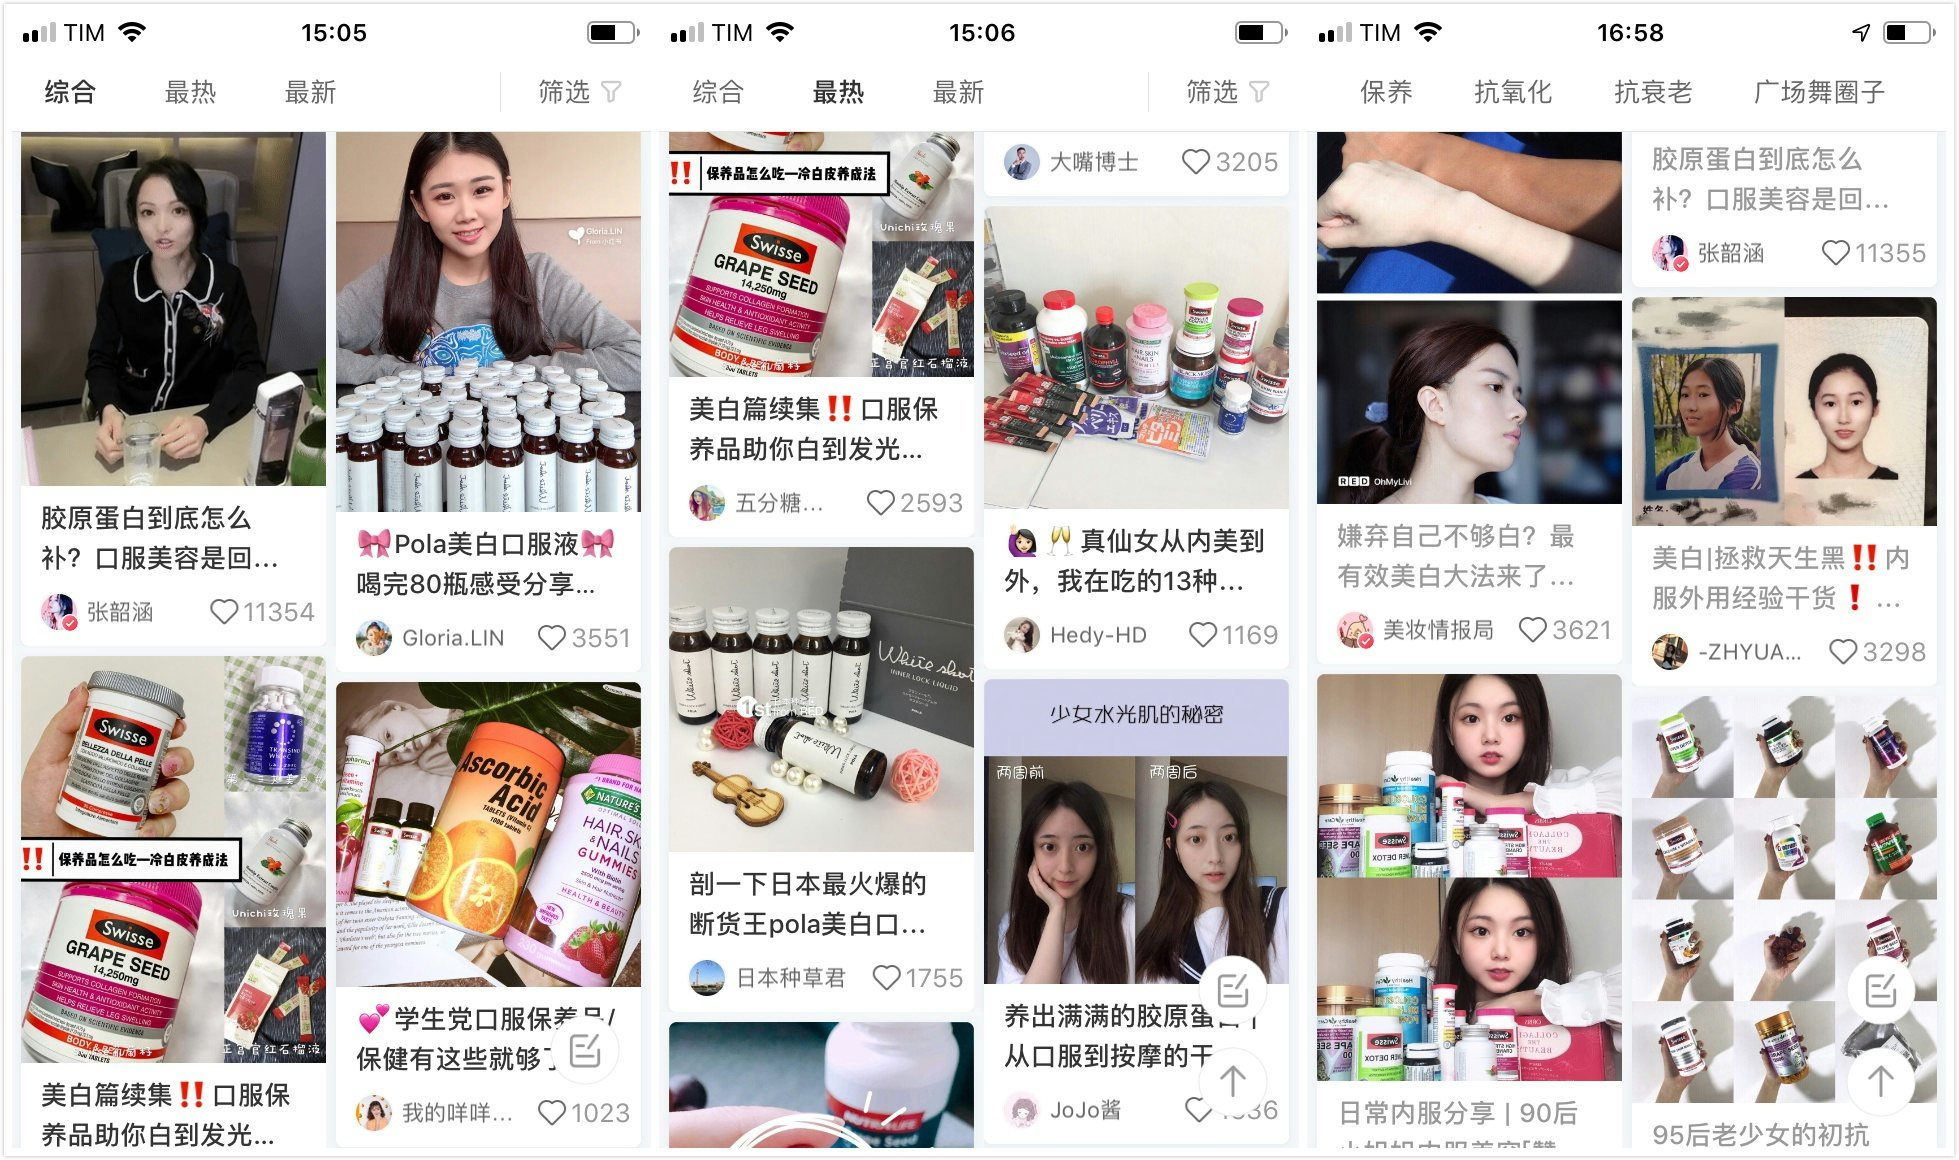 The #beautysupplement community on Little Red Book platform, featuring young women sharing their supplement routines. Photo: screenshot